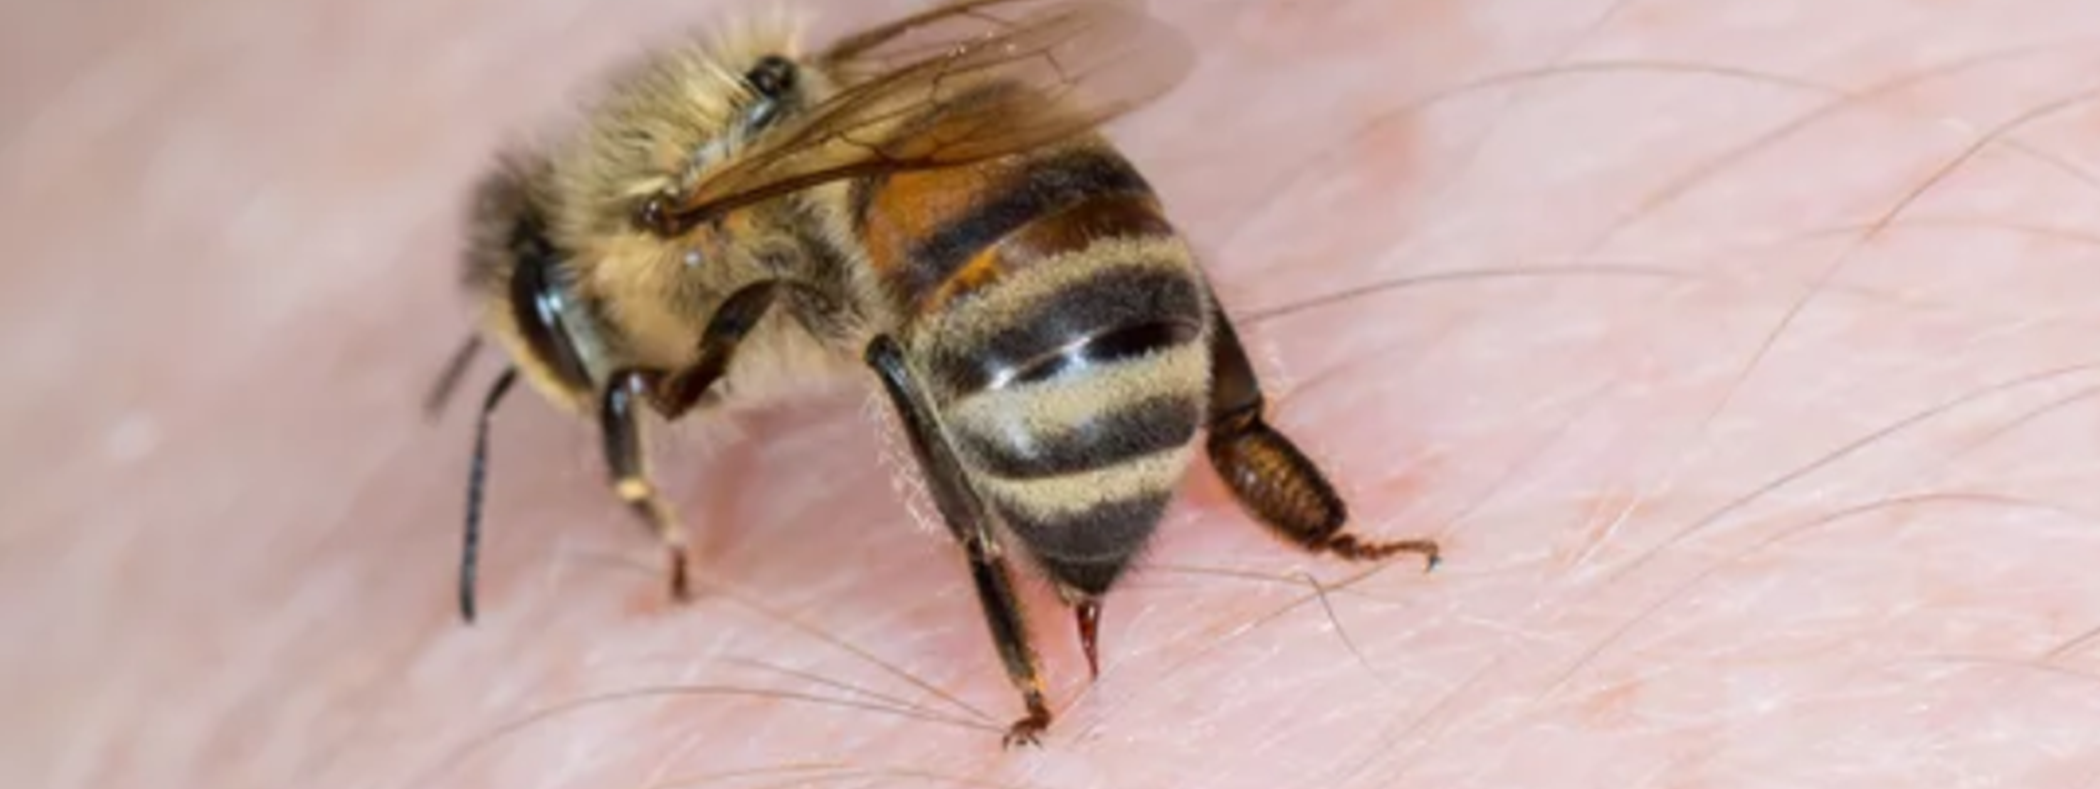 Burlington Pest Control: Why Do Bees Die After They Sting?